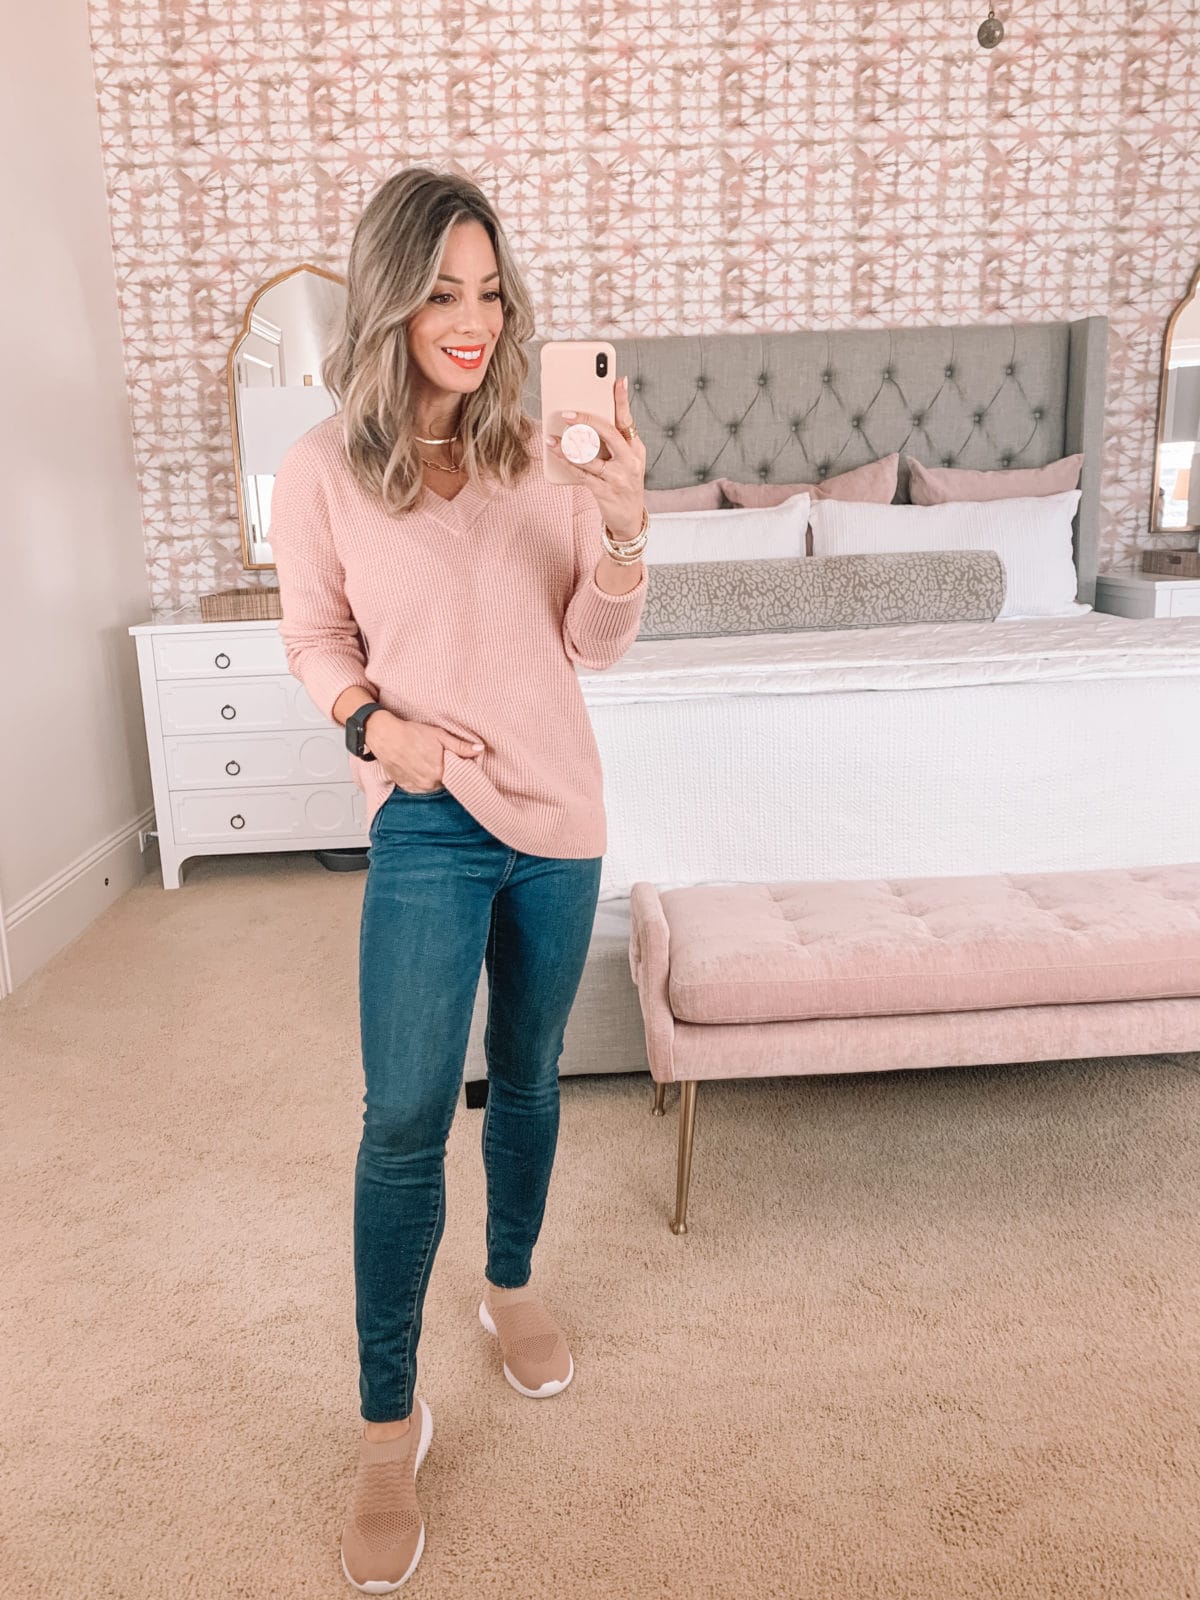 Amazon Fashion Faves, Pink V Neck Sweater, Jeans, Slide on Sneakers 